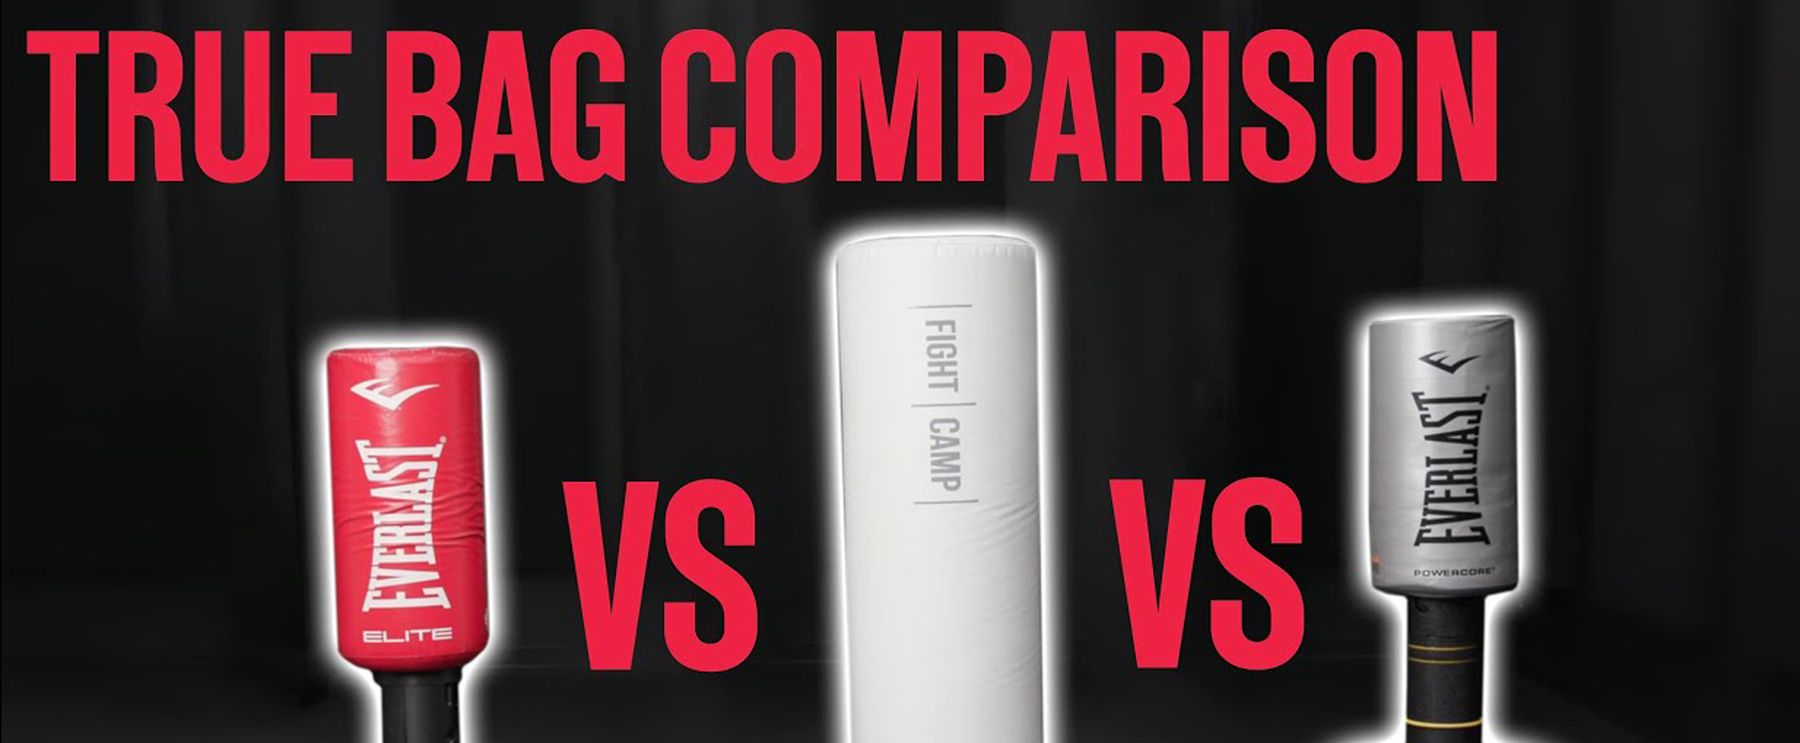 FightCamp True Bag Comparison - The Best Boxing Bags for Home